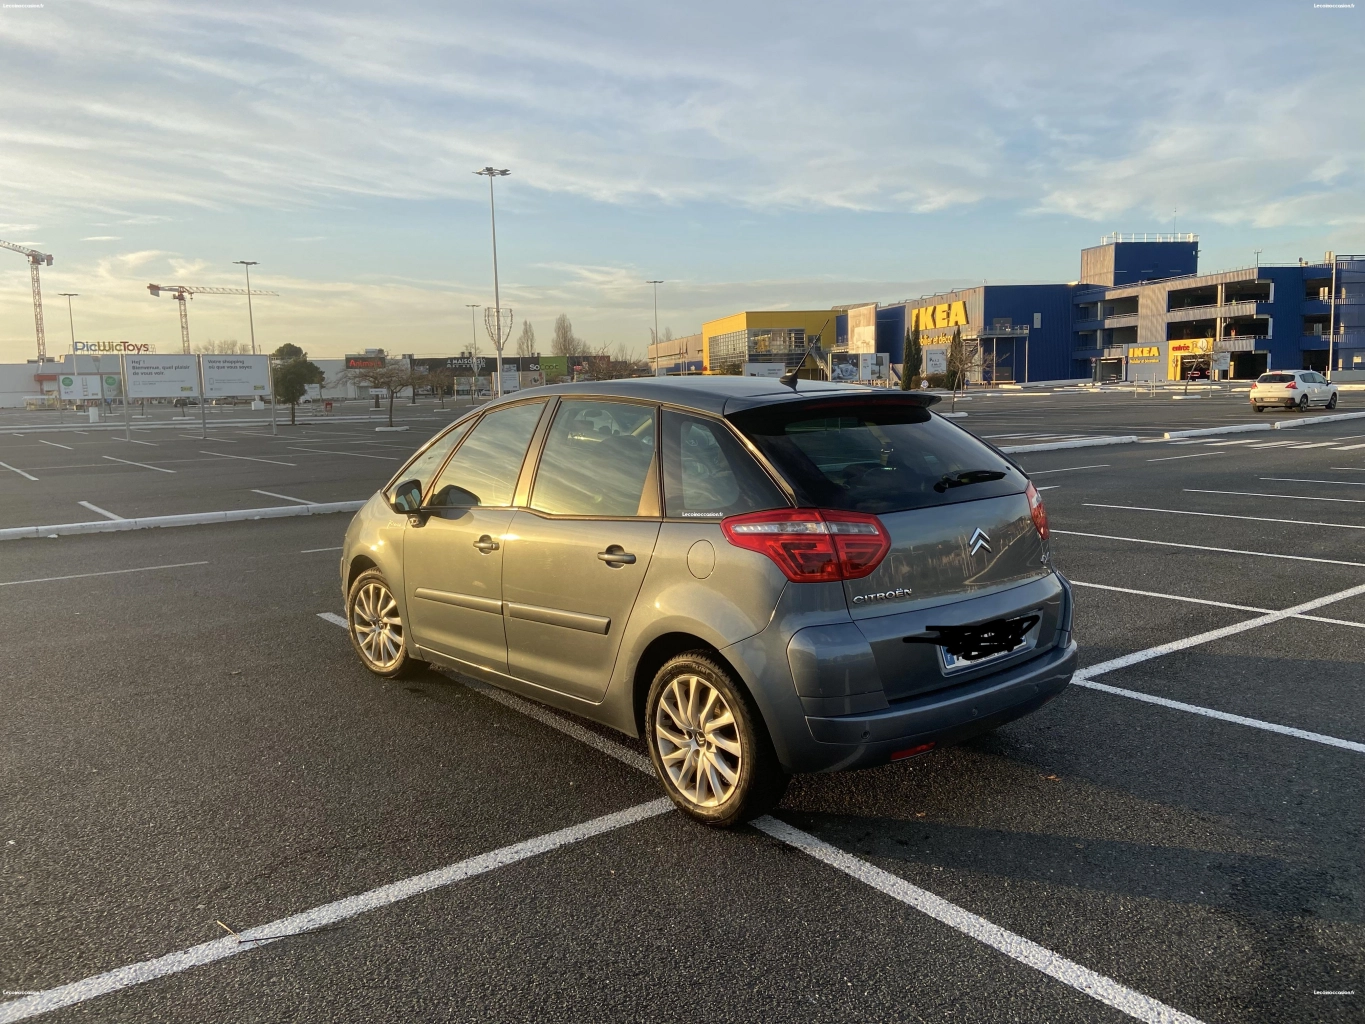 C4 Picasso 1,6 HDI 110cv 5 places